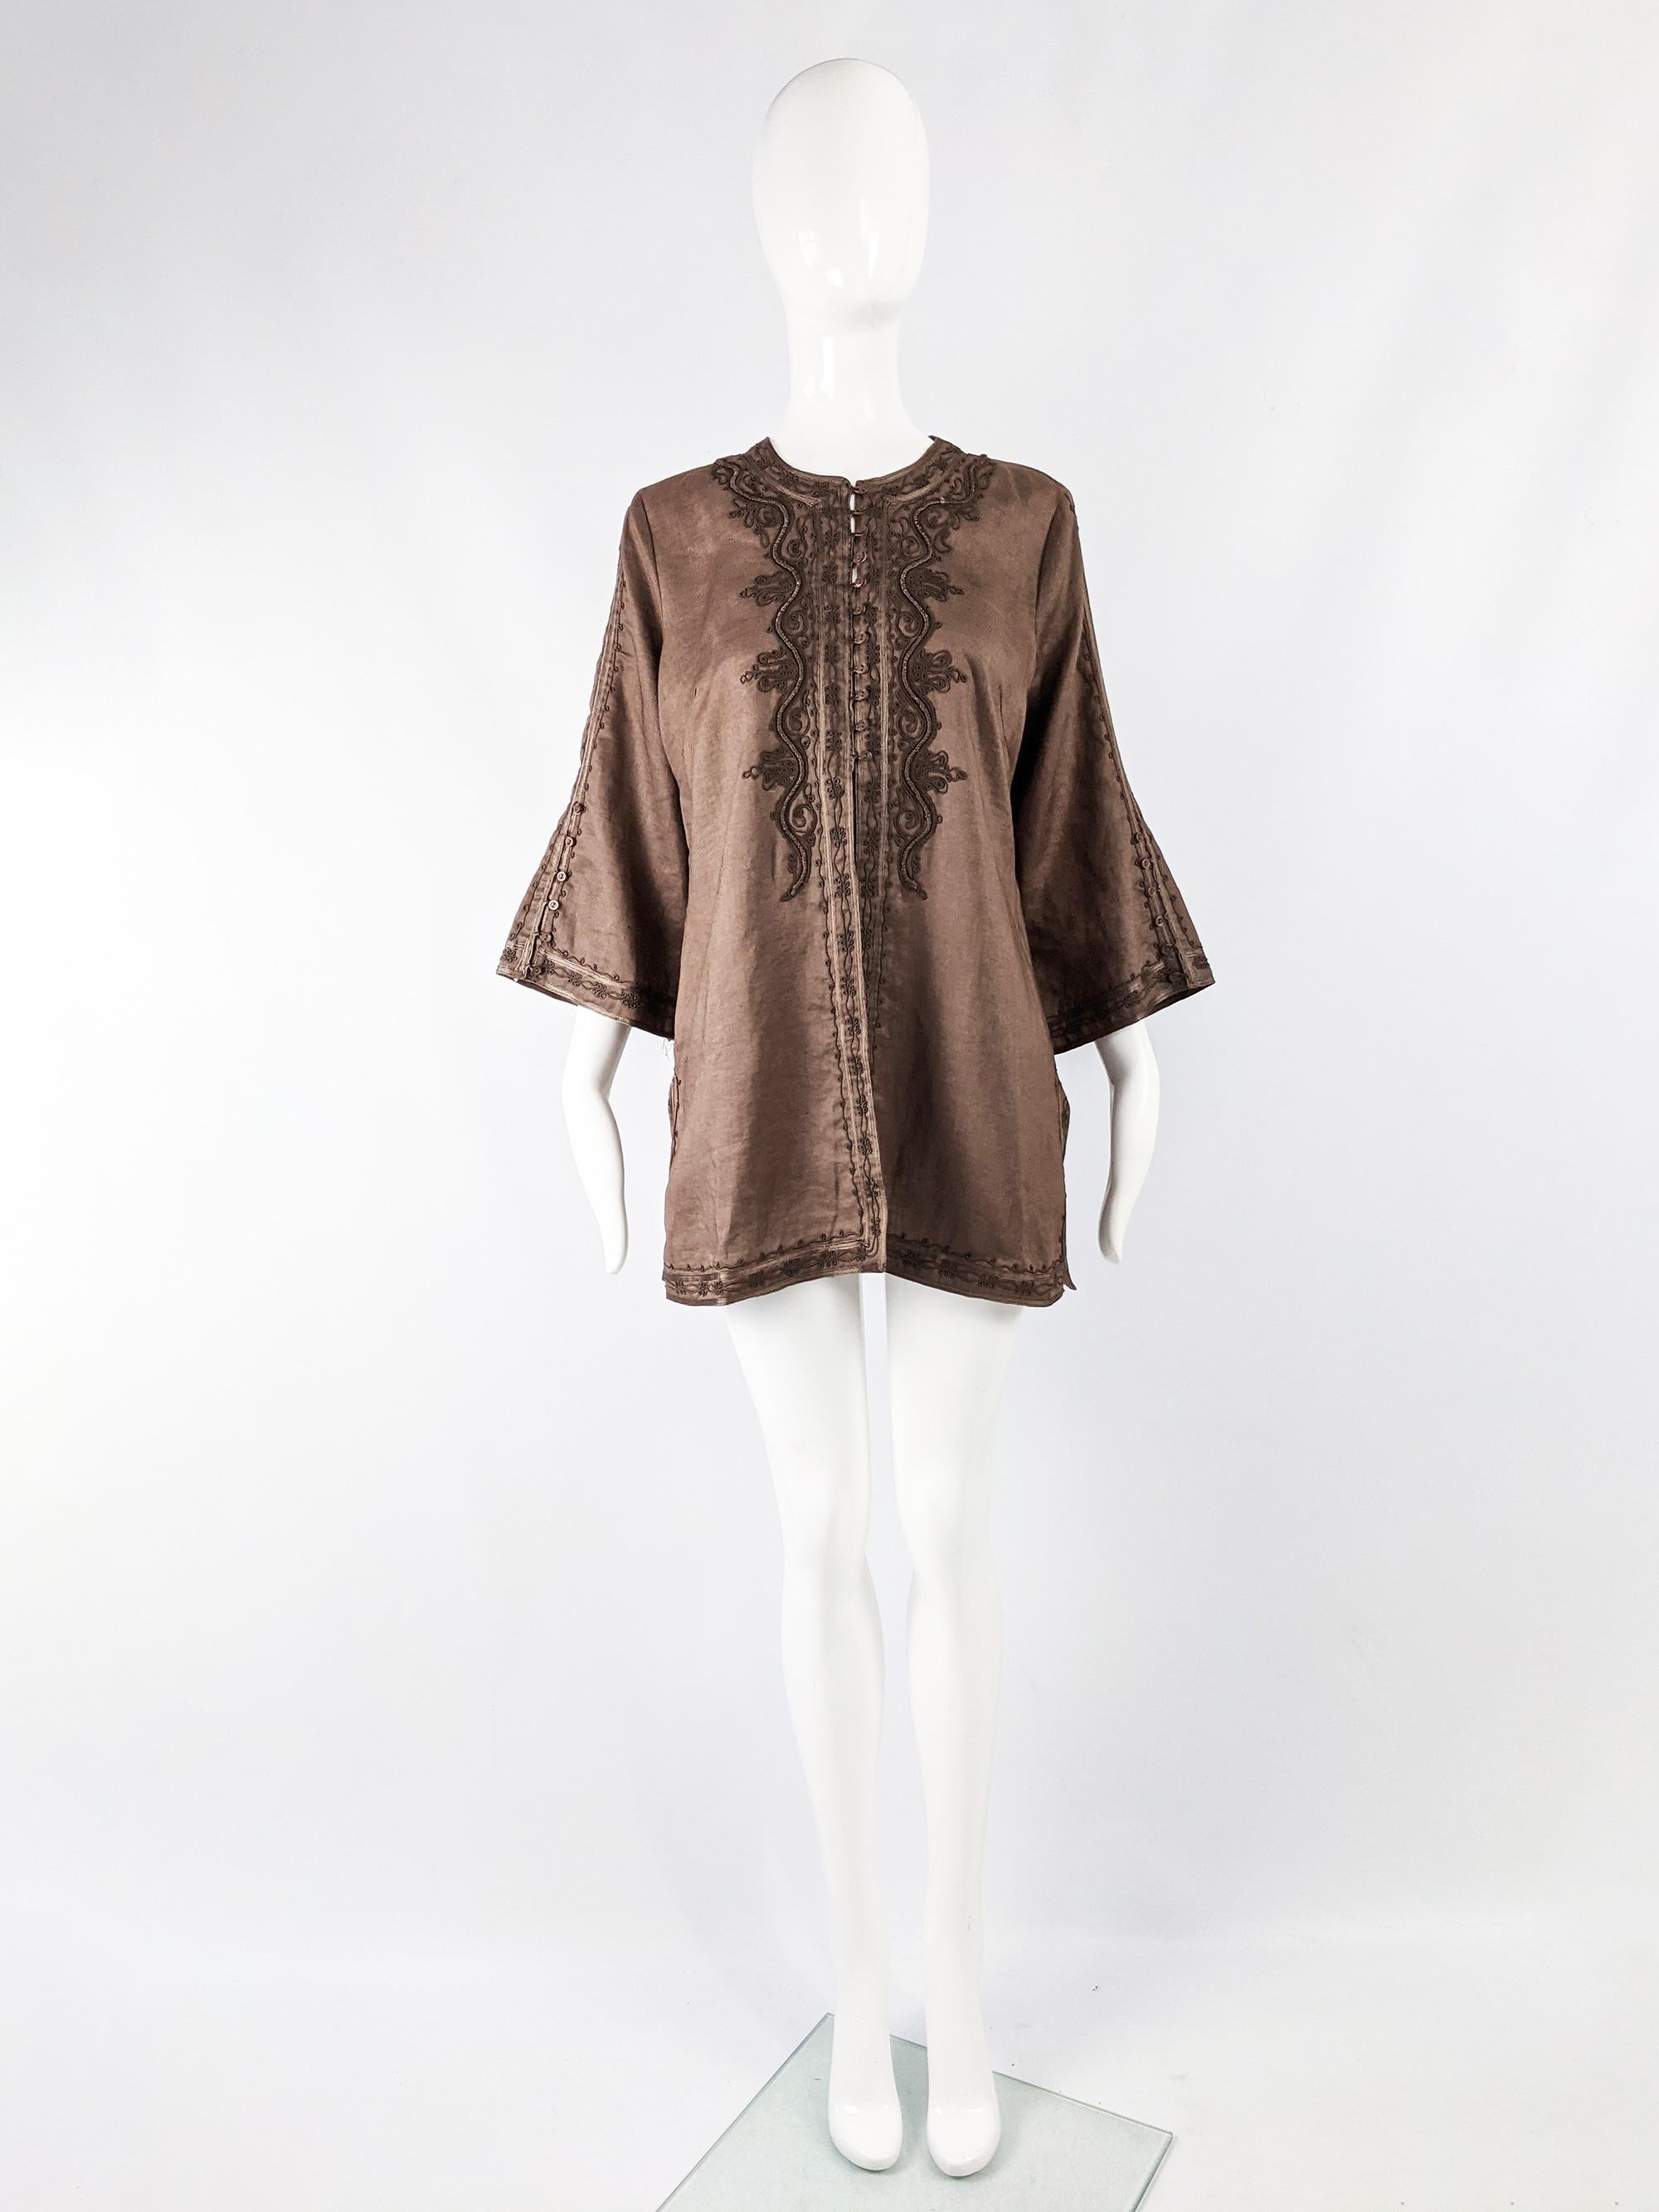 A fabulous womens vintage long sleeve boho shirt from the 90s by iconic British fashion designer, Katherine Hamnett. In a brown linen fabric with long sleeves that flare out and amazing Asian style embroidery / couching which gives a luxe hippie